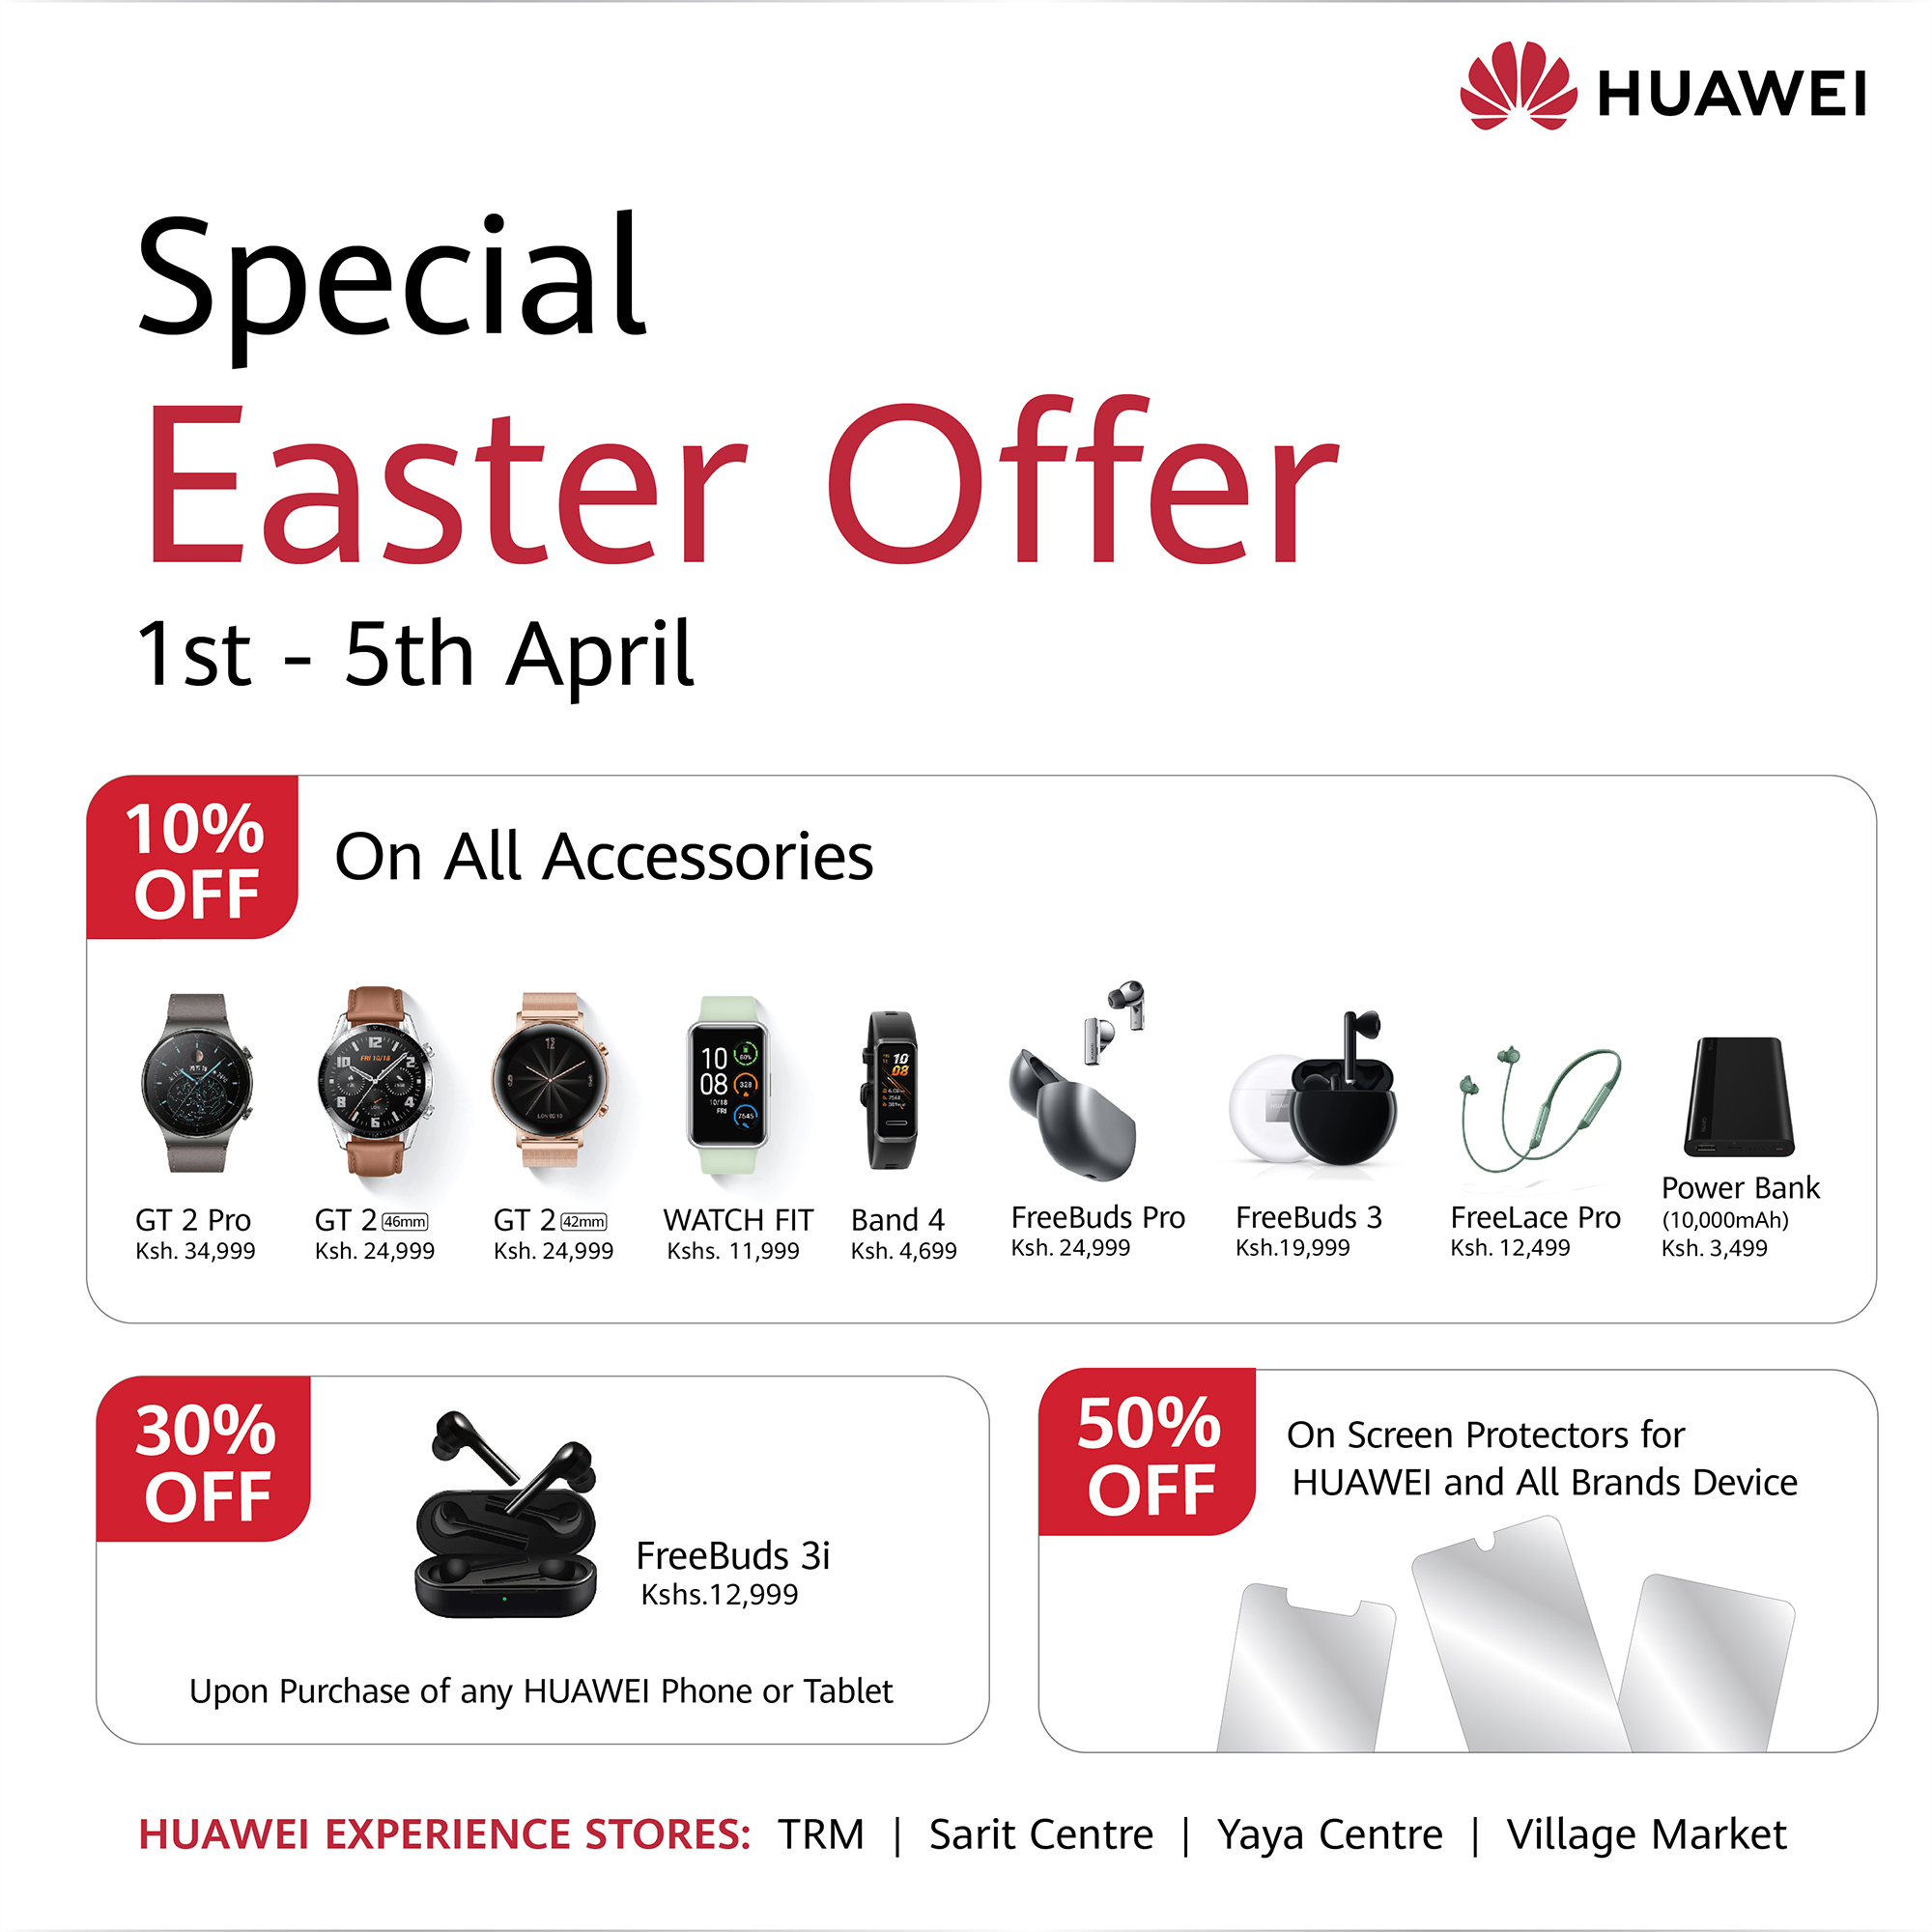 Huawei Mobile has announced it will be running a 5-day campaign that will be offering discounts on a range of their products. These offers can be found at Huawei Experience stores in Nairobi. These stores are in Sarit Centre, Yaya Centre, Village Market, and Thika Road Mall. 